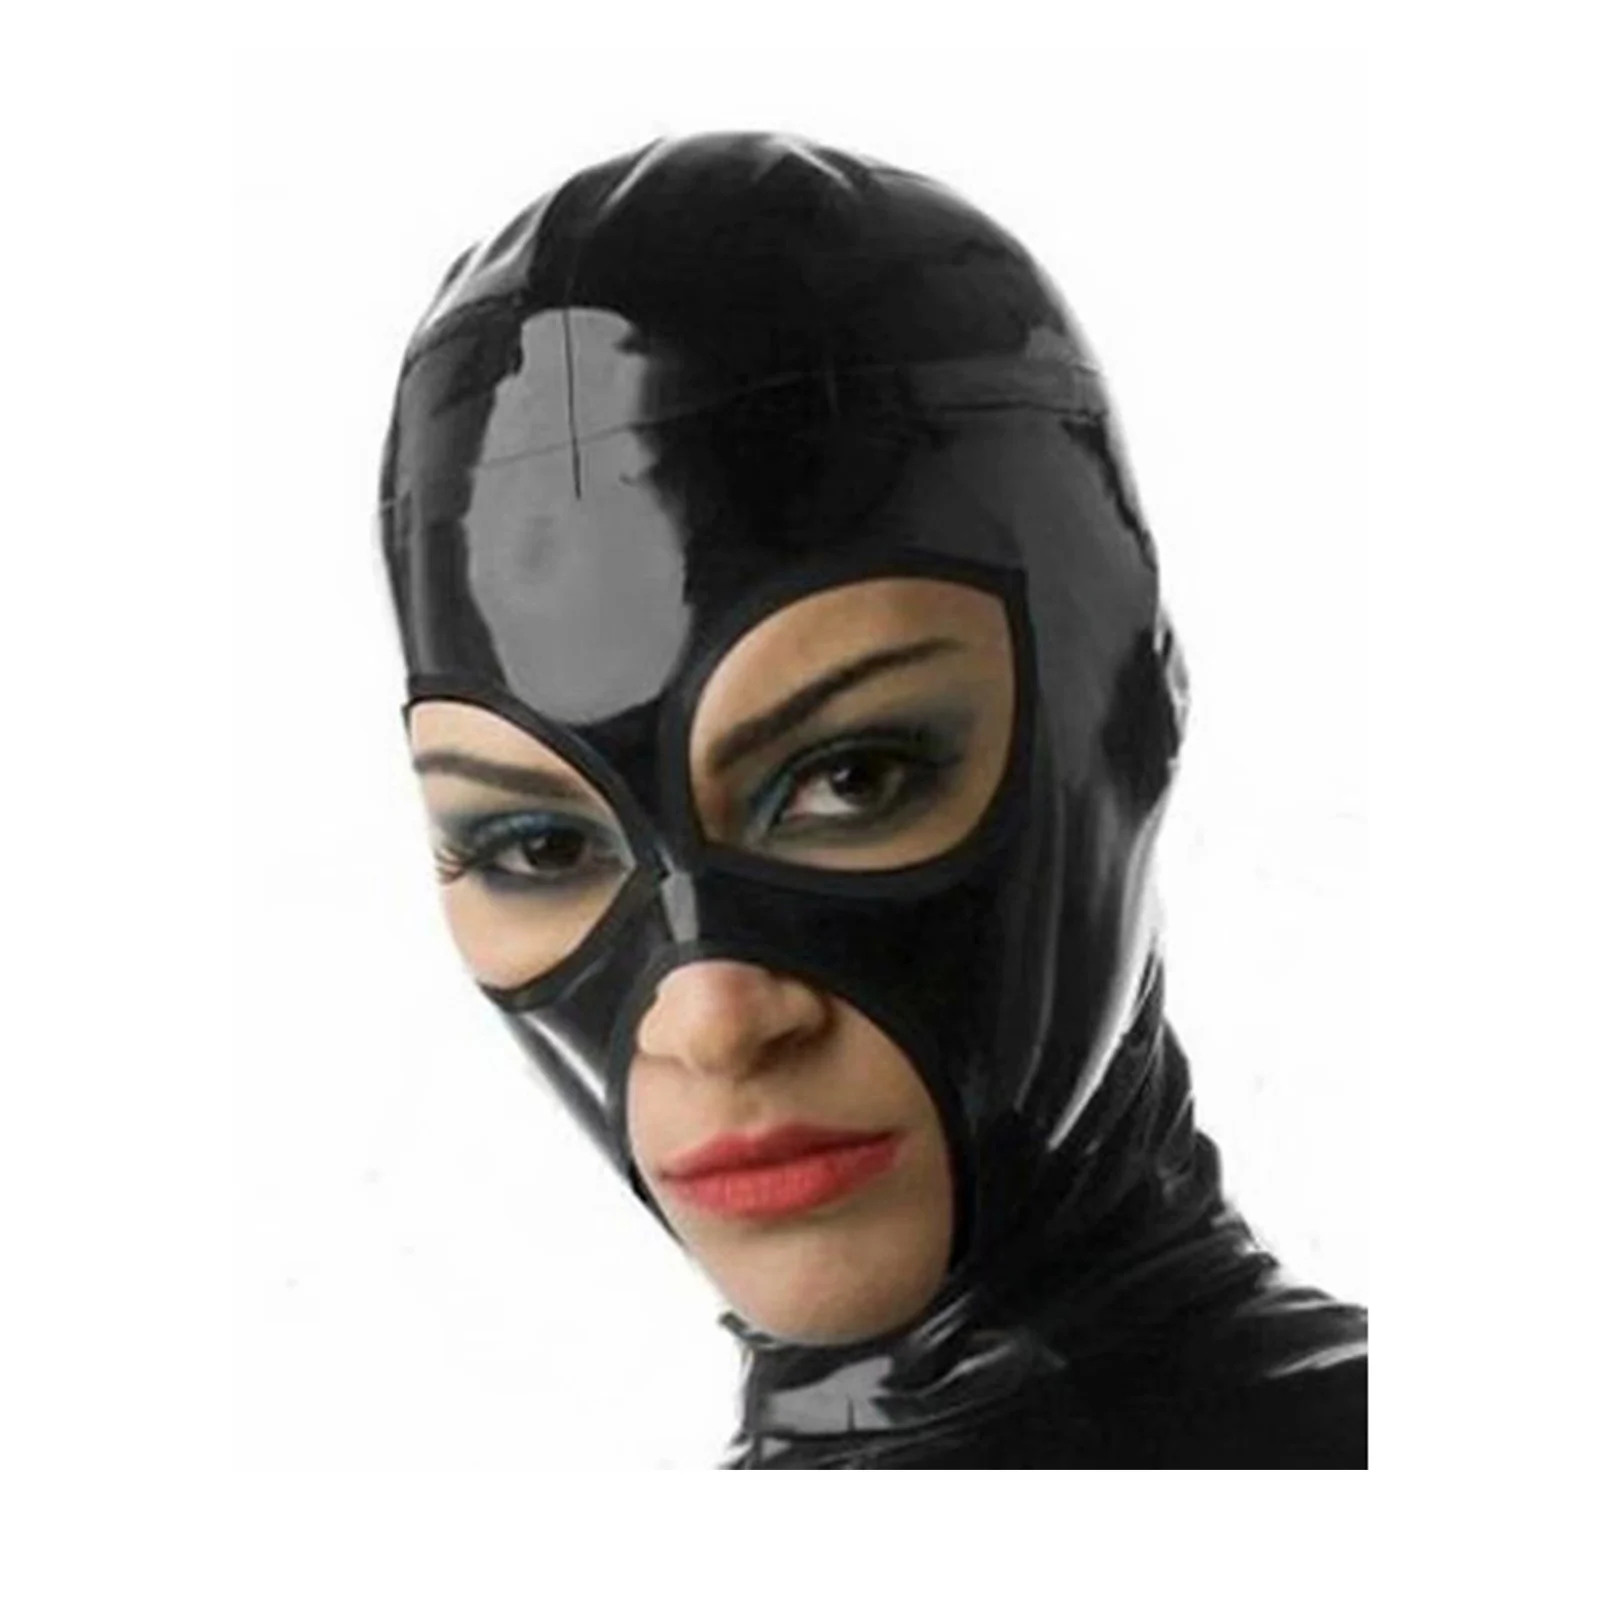 switch alarm switch sensor 2005 2012 3 series 61319119052 alarm black e90 hood parts new replace 1pcs e92 MONNIK Latex Mask Black Rubber Unisex Hood Open Eyes and Mouth Handmade for Latex Fetish Party Catsuit Halloween Clubwear